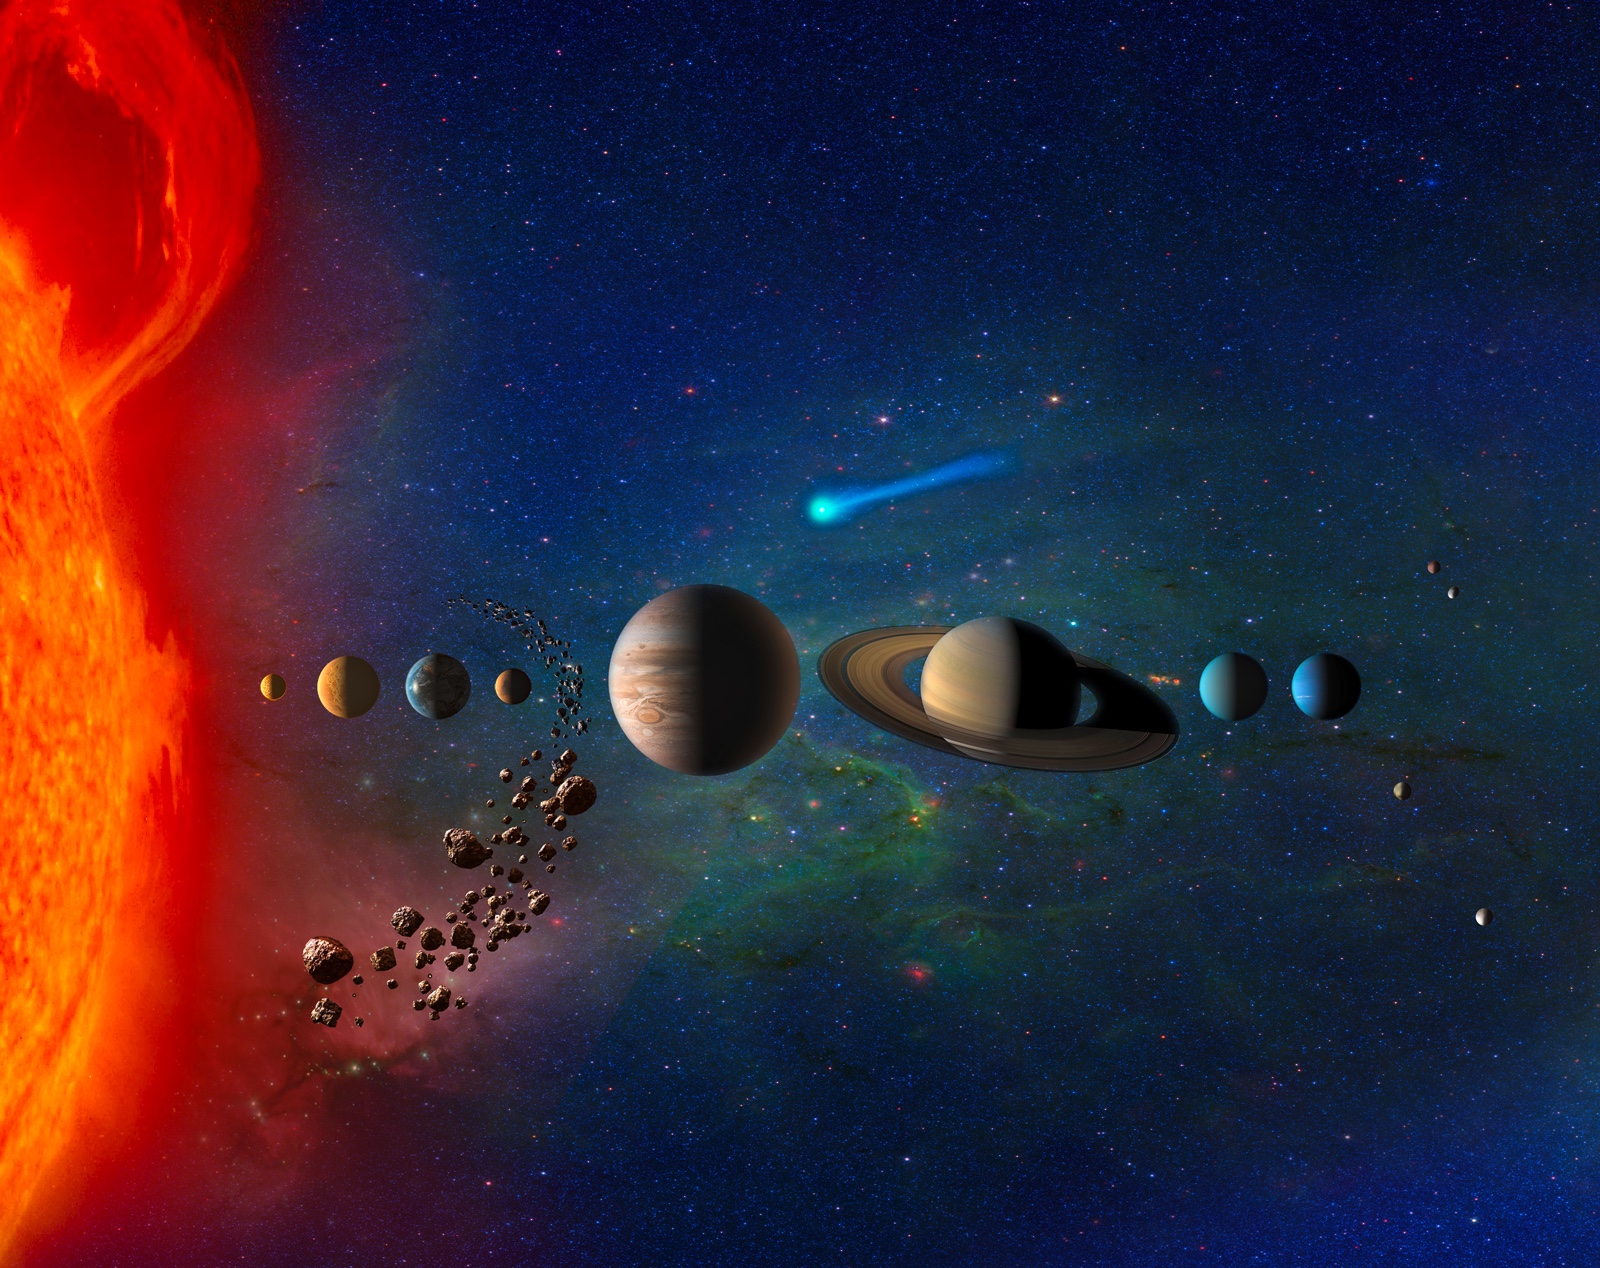 Solar System planets in order according to NASA.